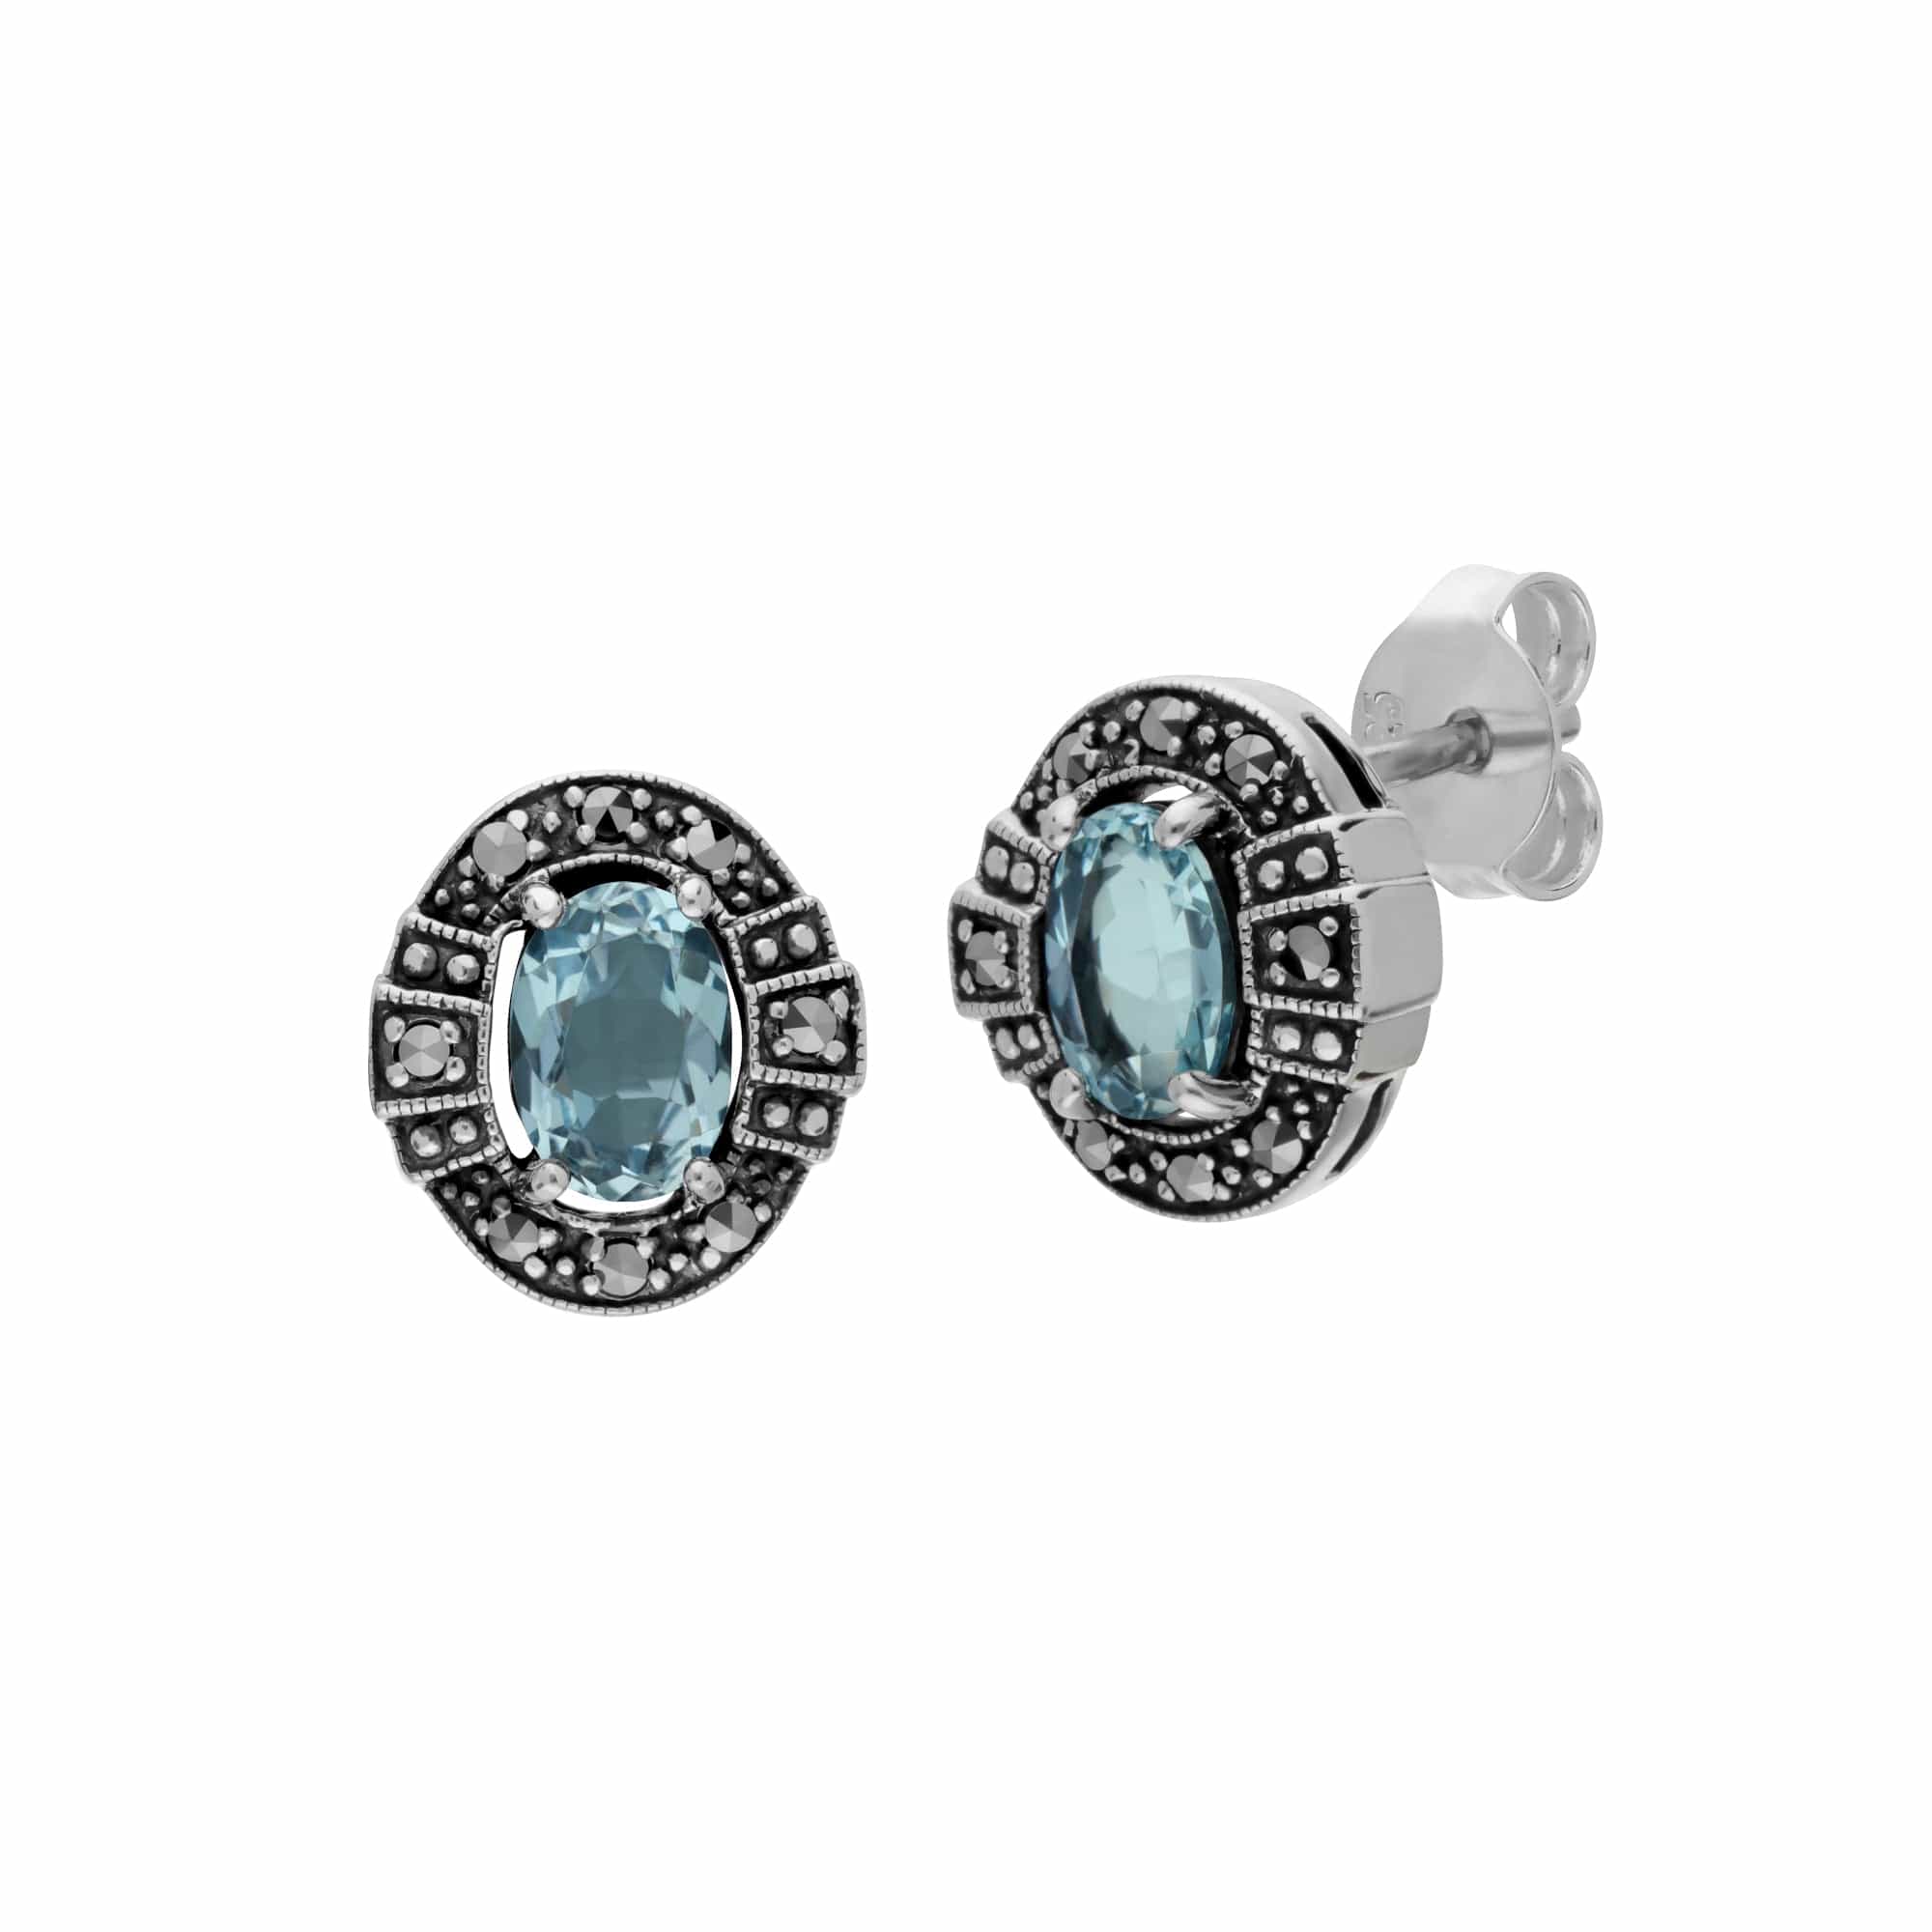 214E873001925-214P303301925 Art Deco Style Oval Blue Topaz and Marcasite Cluster Stud Earrings & Pendant Set in 925 Sterling Silver 2